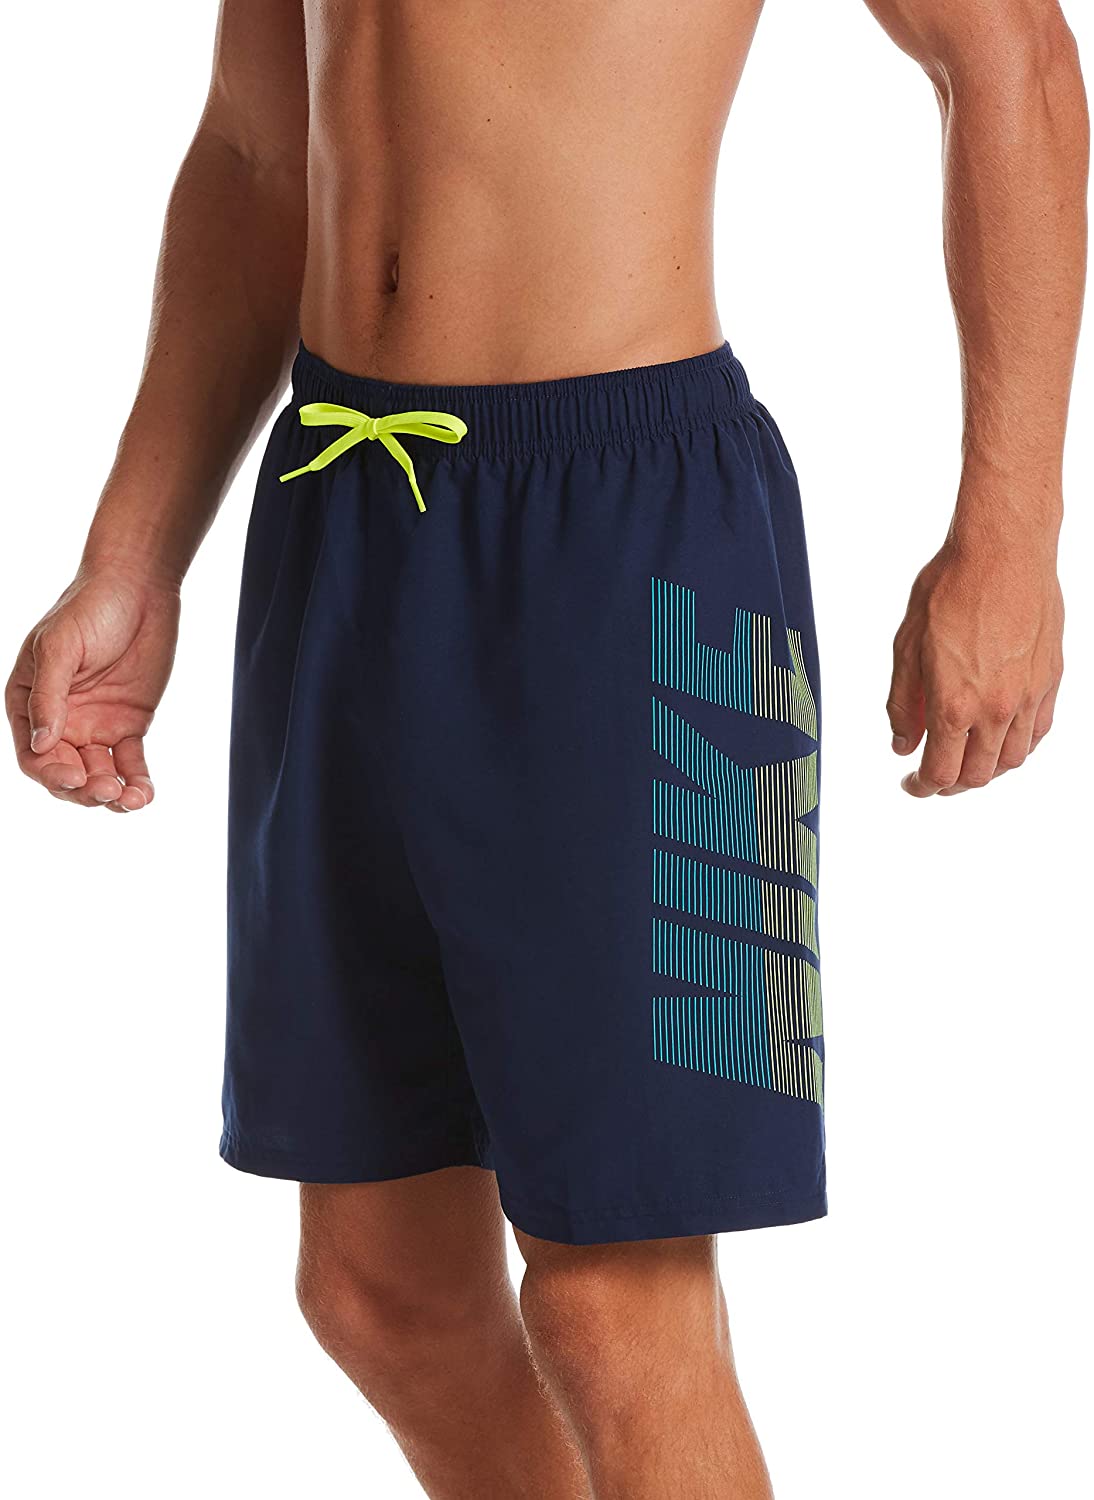 Men's Nike Logo Volley Short Swim Trunk in Midnight Navy color from the front